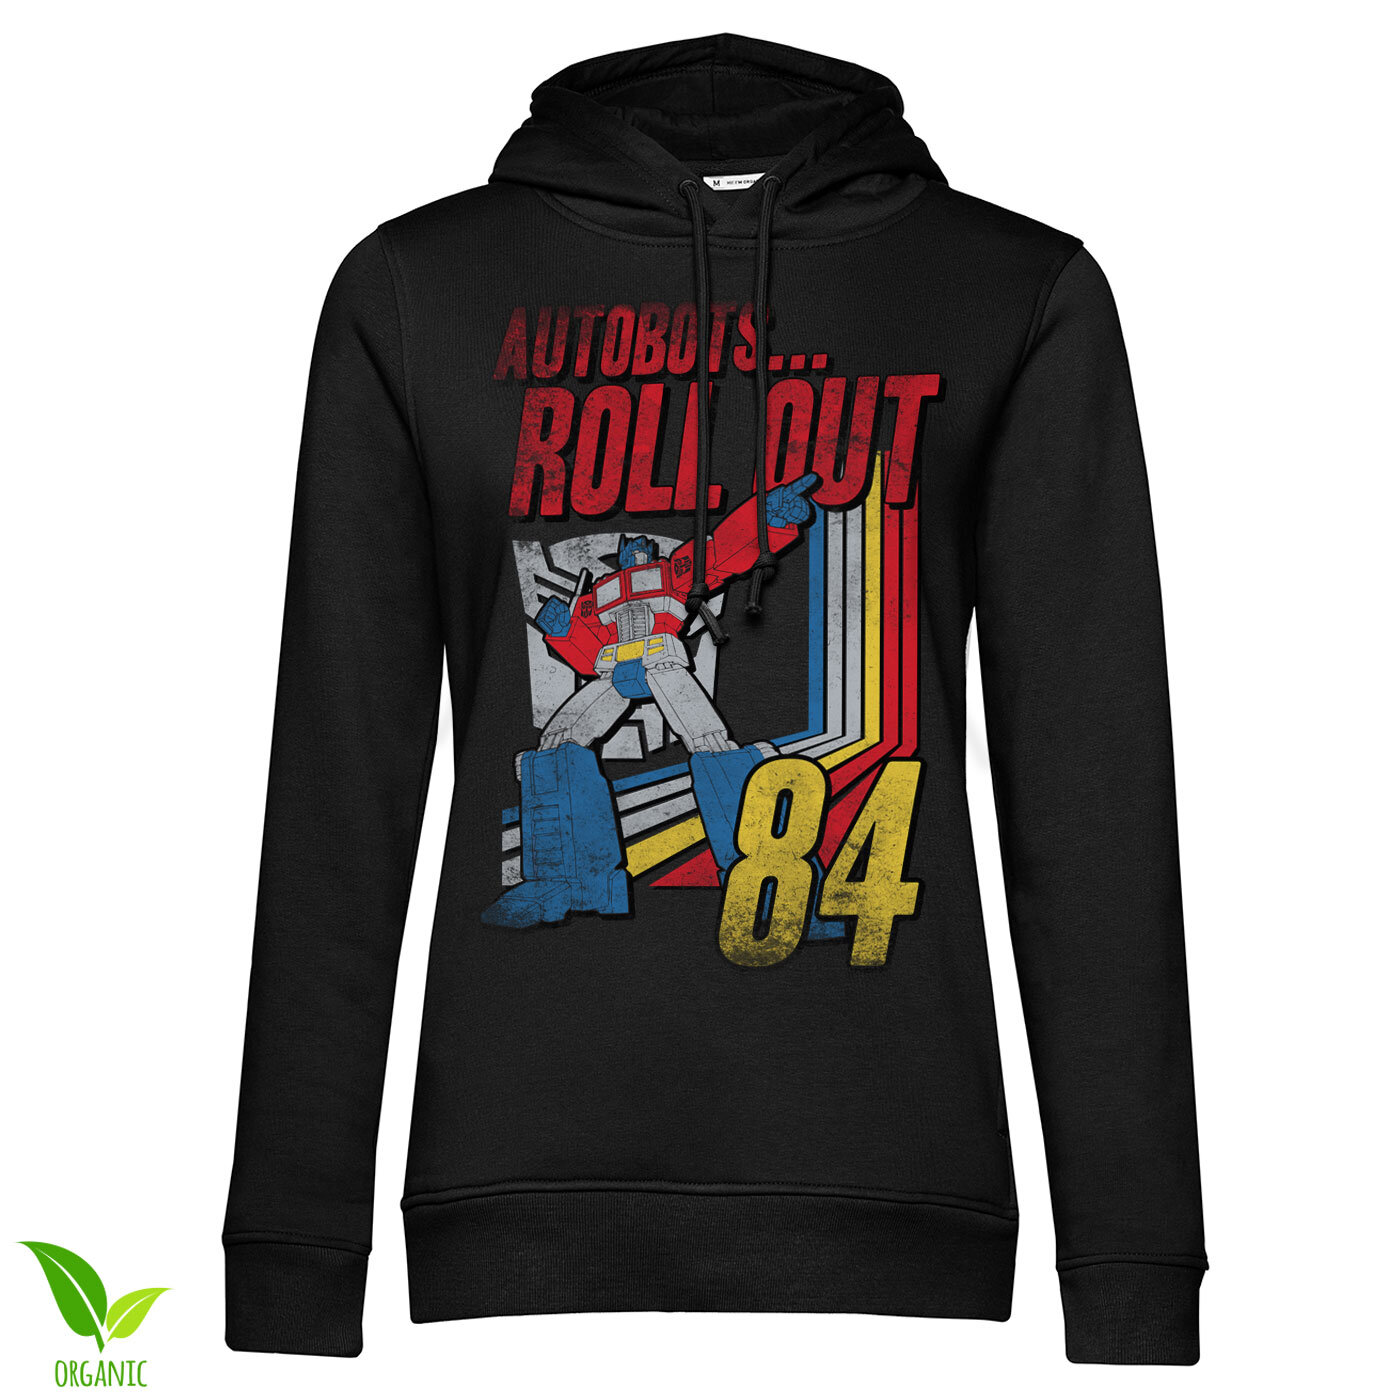 Autobots - Roll Out Girls Hoodie